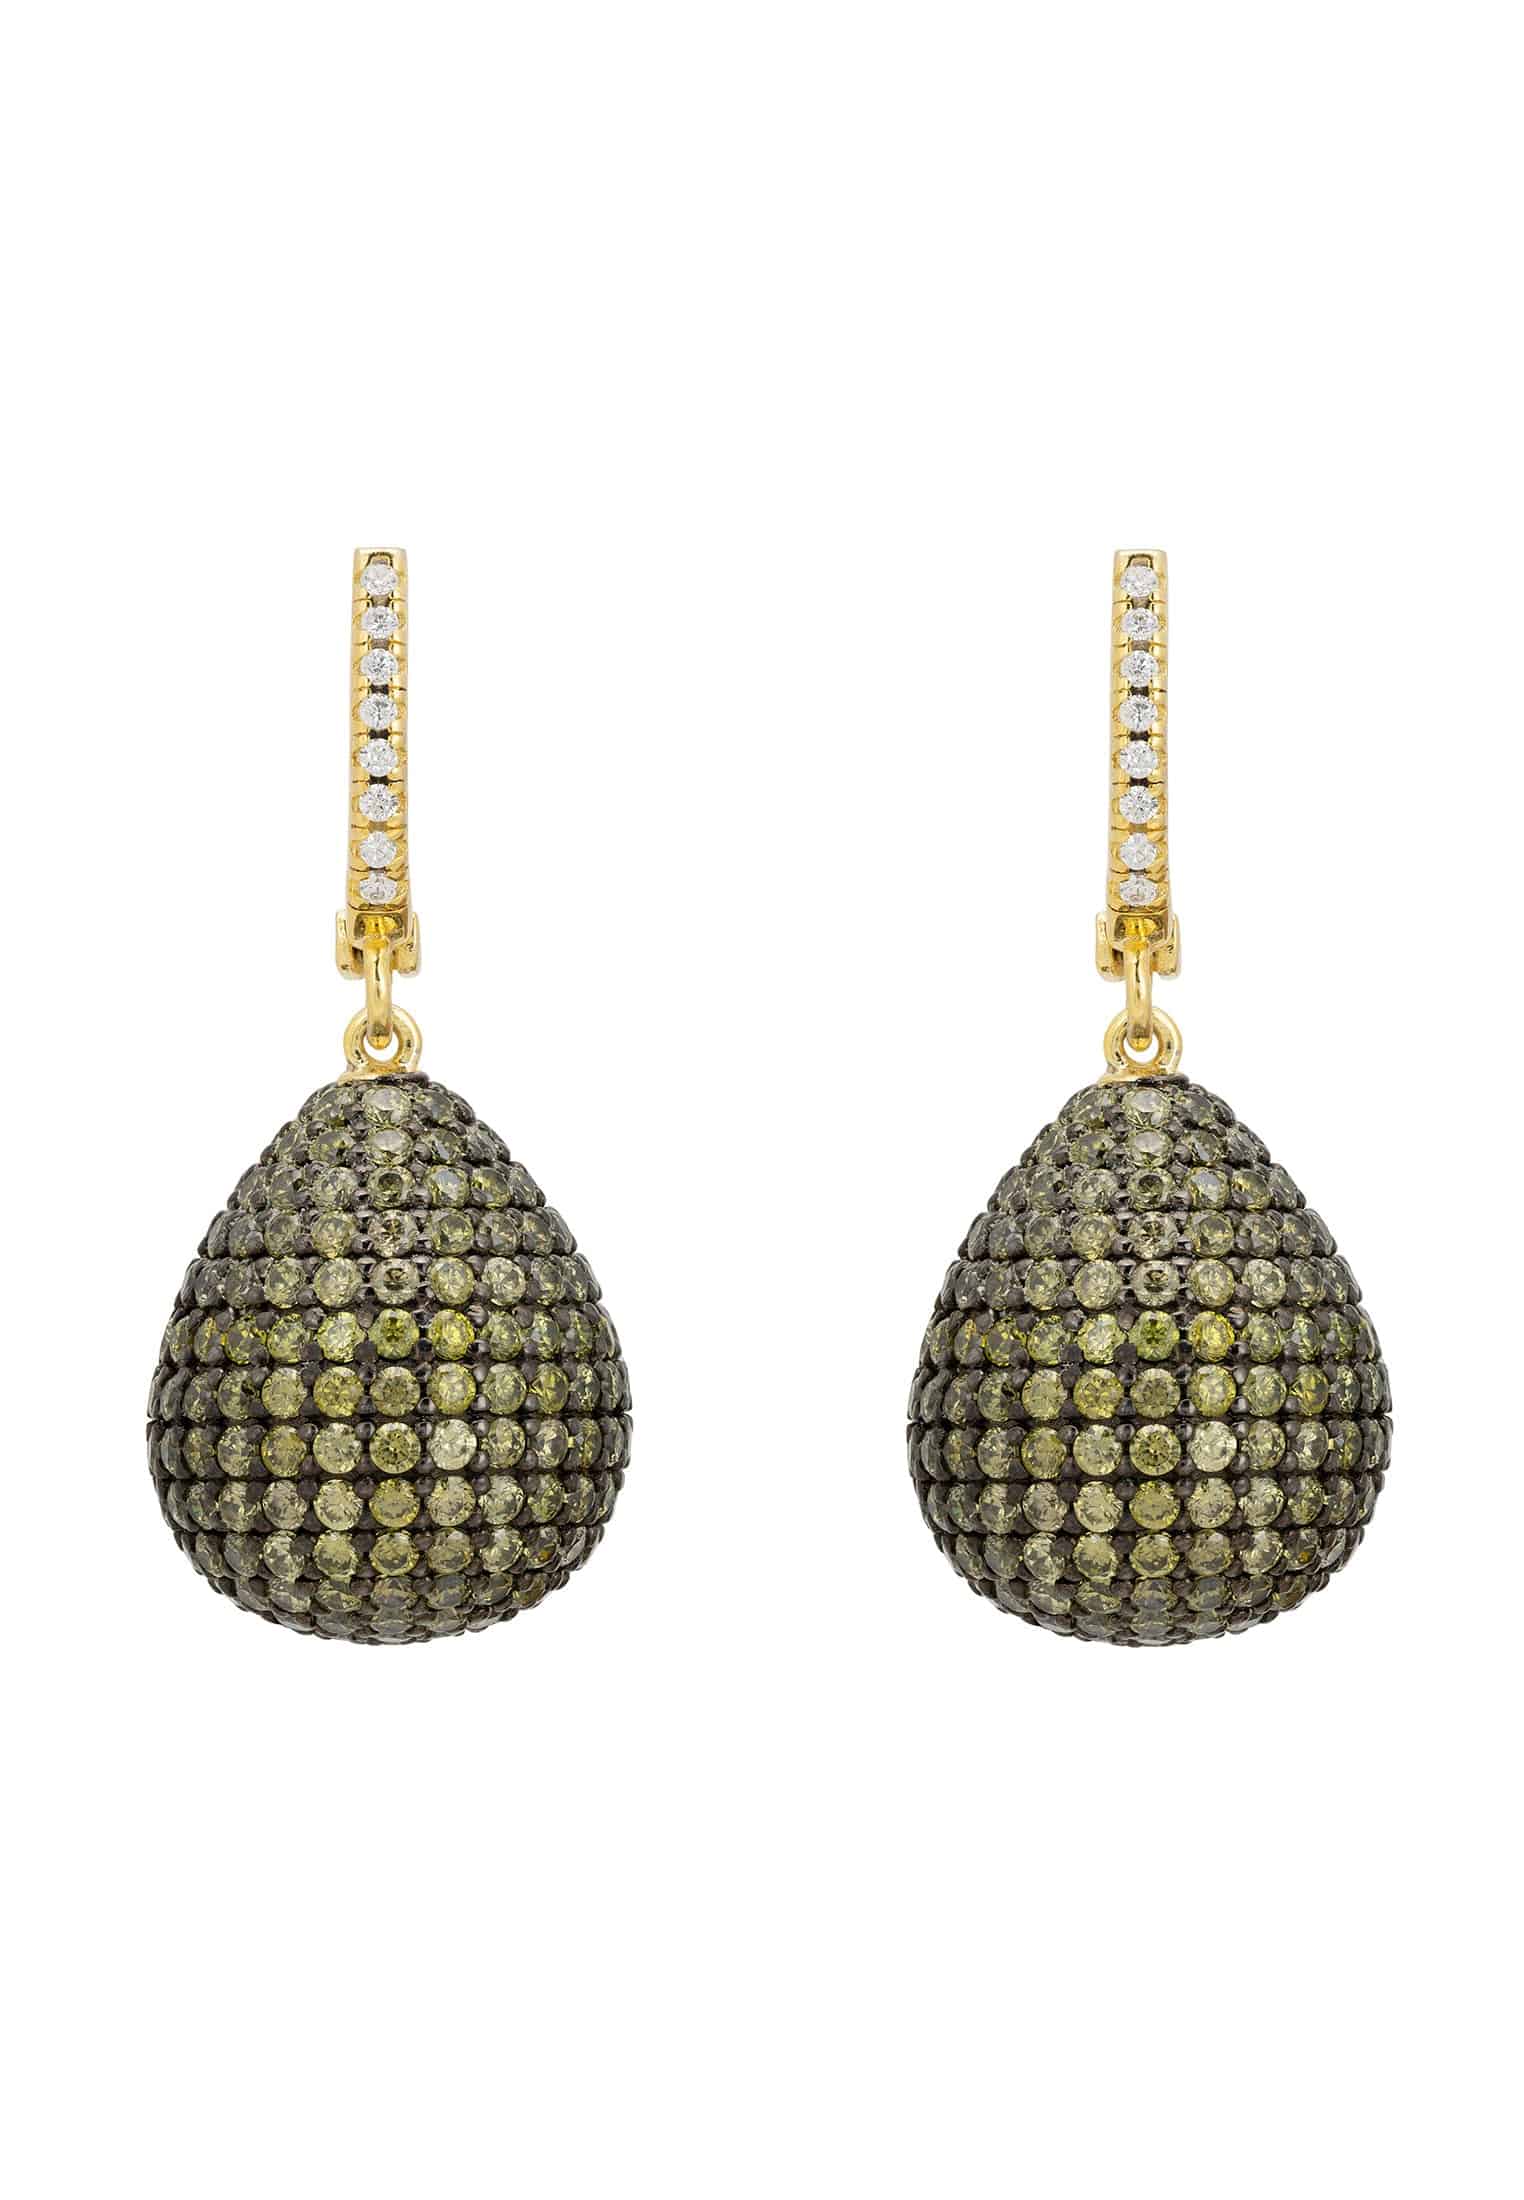 Gold Peridot Gemstone Drop Earrings with Zircon Accents - Statement Jewelry for Weddings and Cocktails Bijou Her